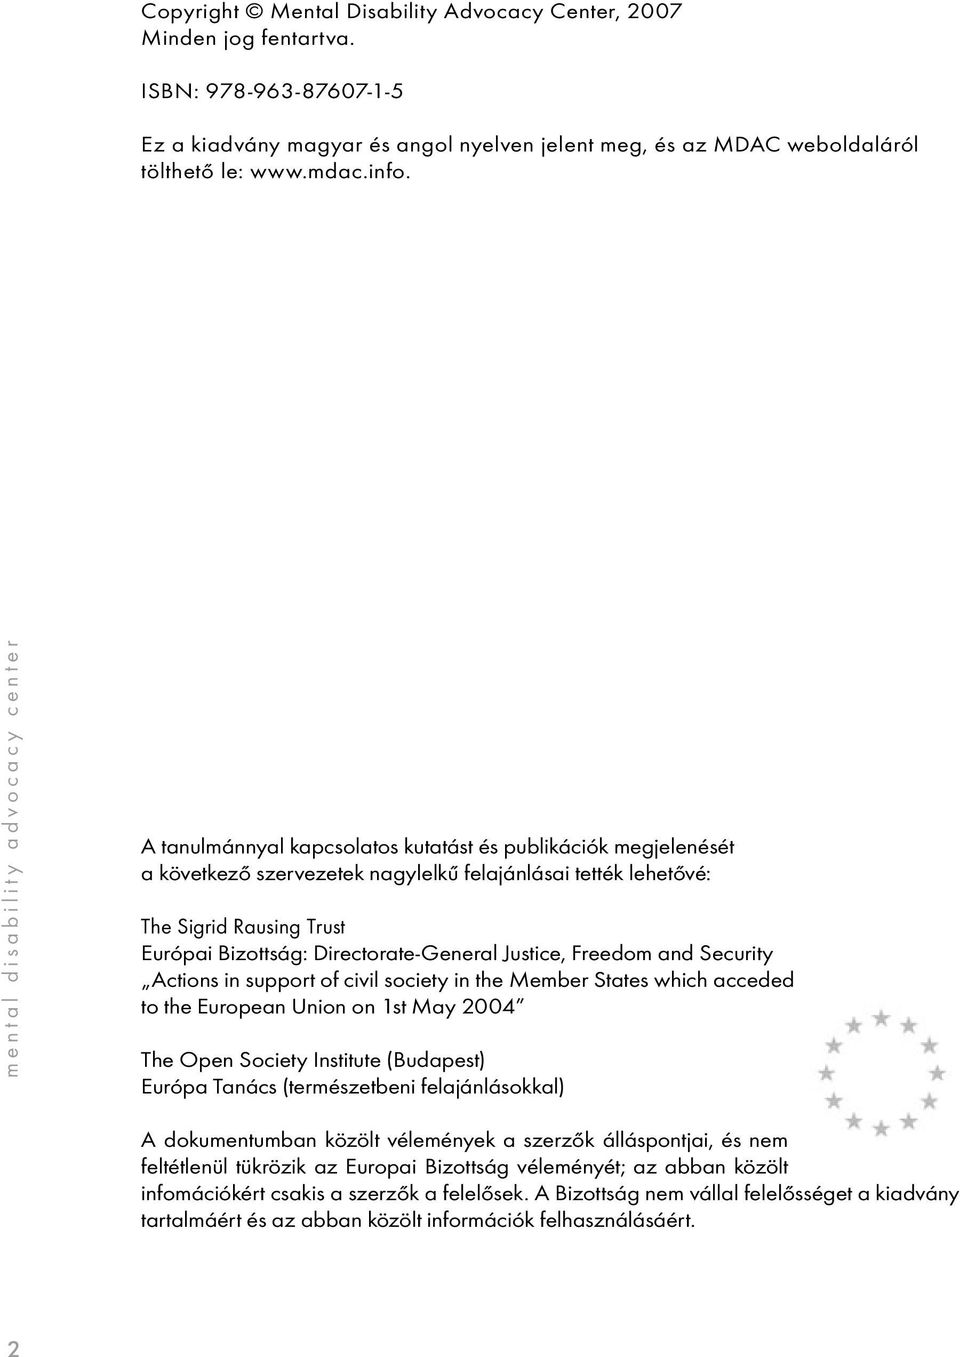 Rausing Trust Európai Bizottság: Directorate-General Justice, Freedom and Security Actions in support of civil society in the Member States which acceded to the European Union on 1st May 2004 The